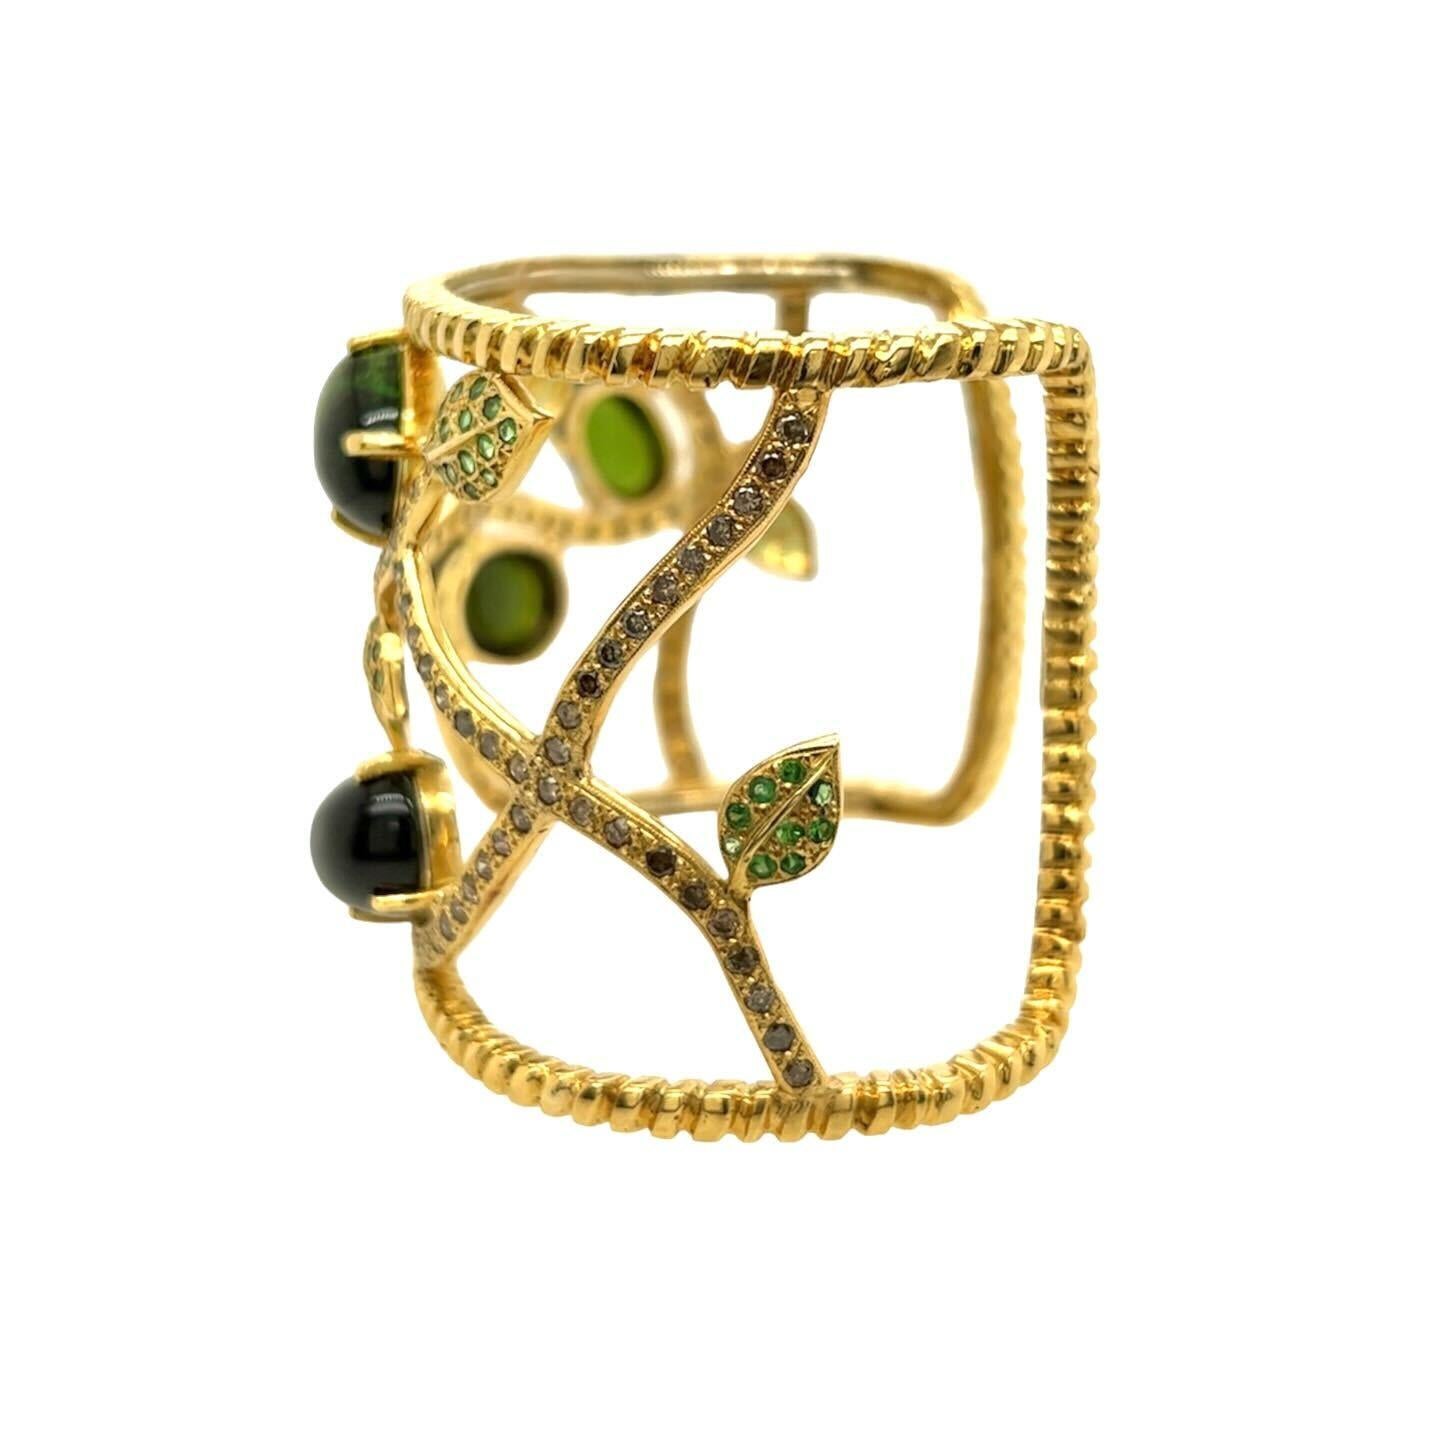 An 18 karat yellow gold, green tourmaline, tsavorite garnet and fancy light brown diamond bracelet, Sazingg.  The wide cuff, with ropework borders, displaying a vine set with four  oval cabochon green tourmalines, the leaves set with approximately